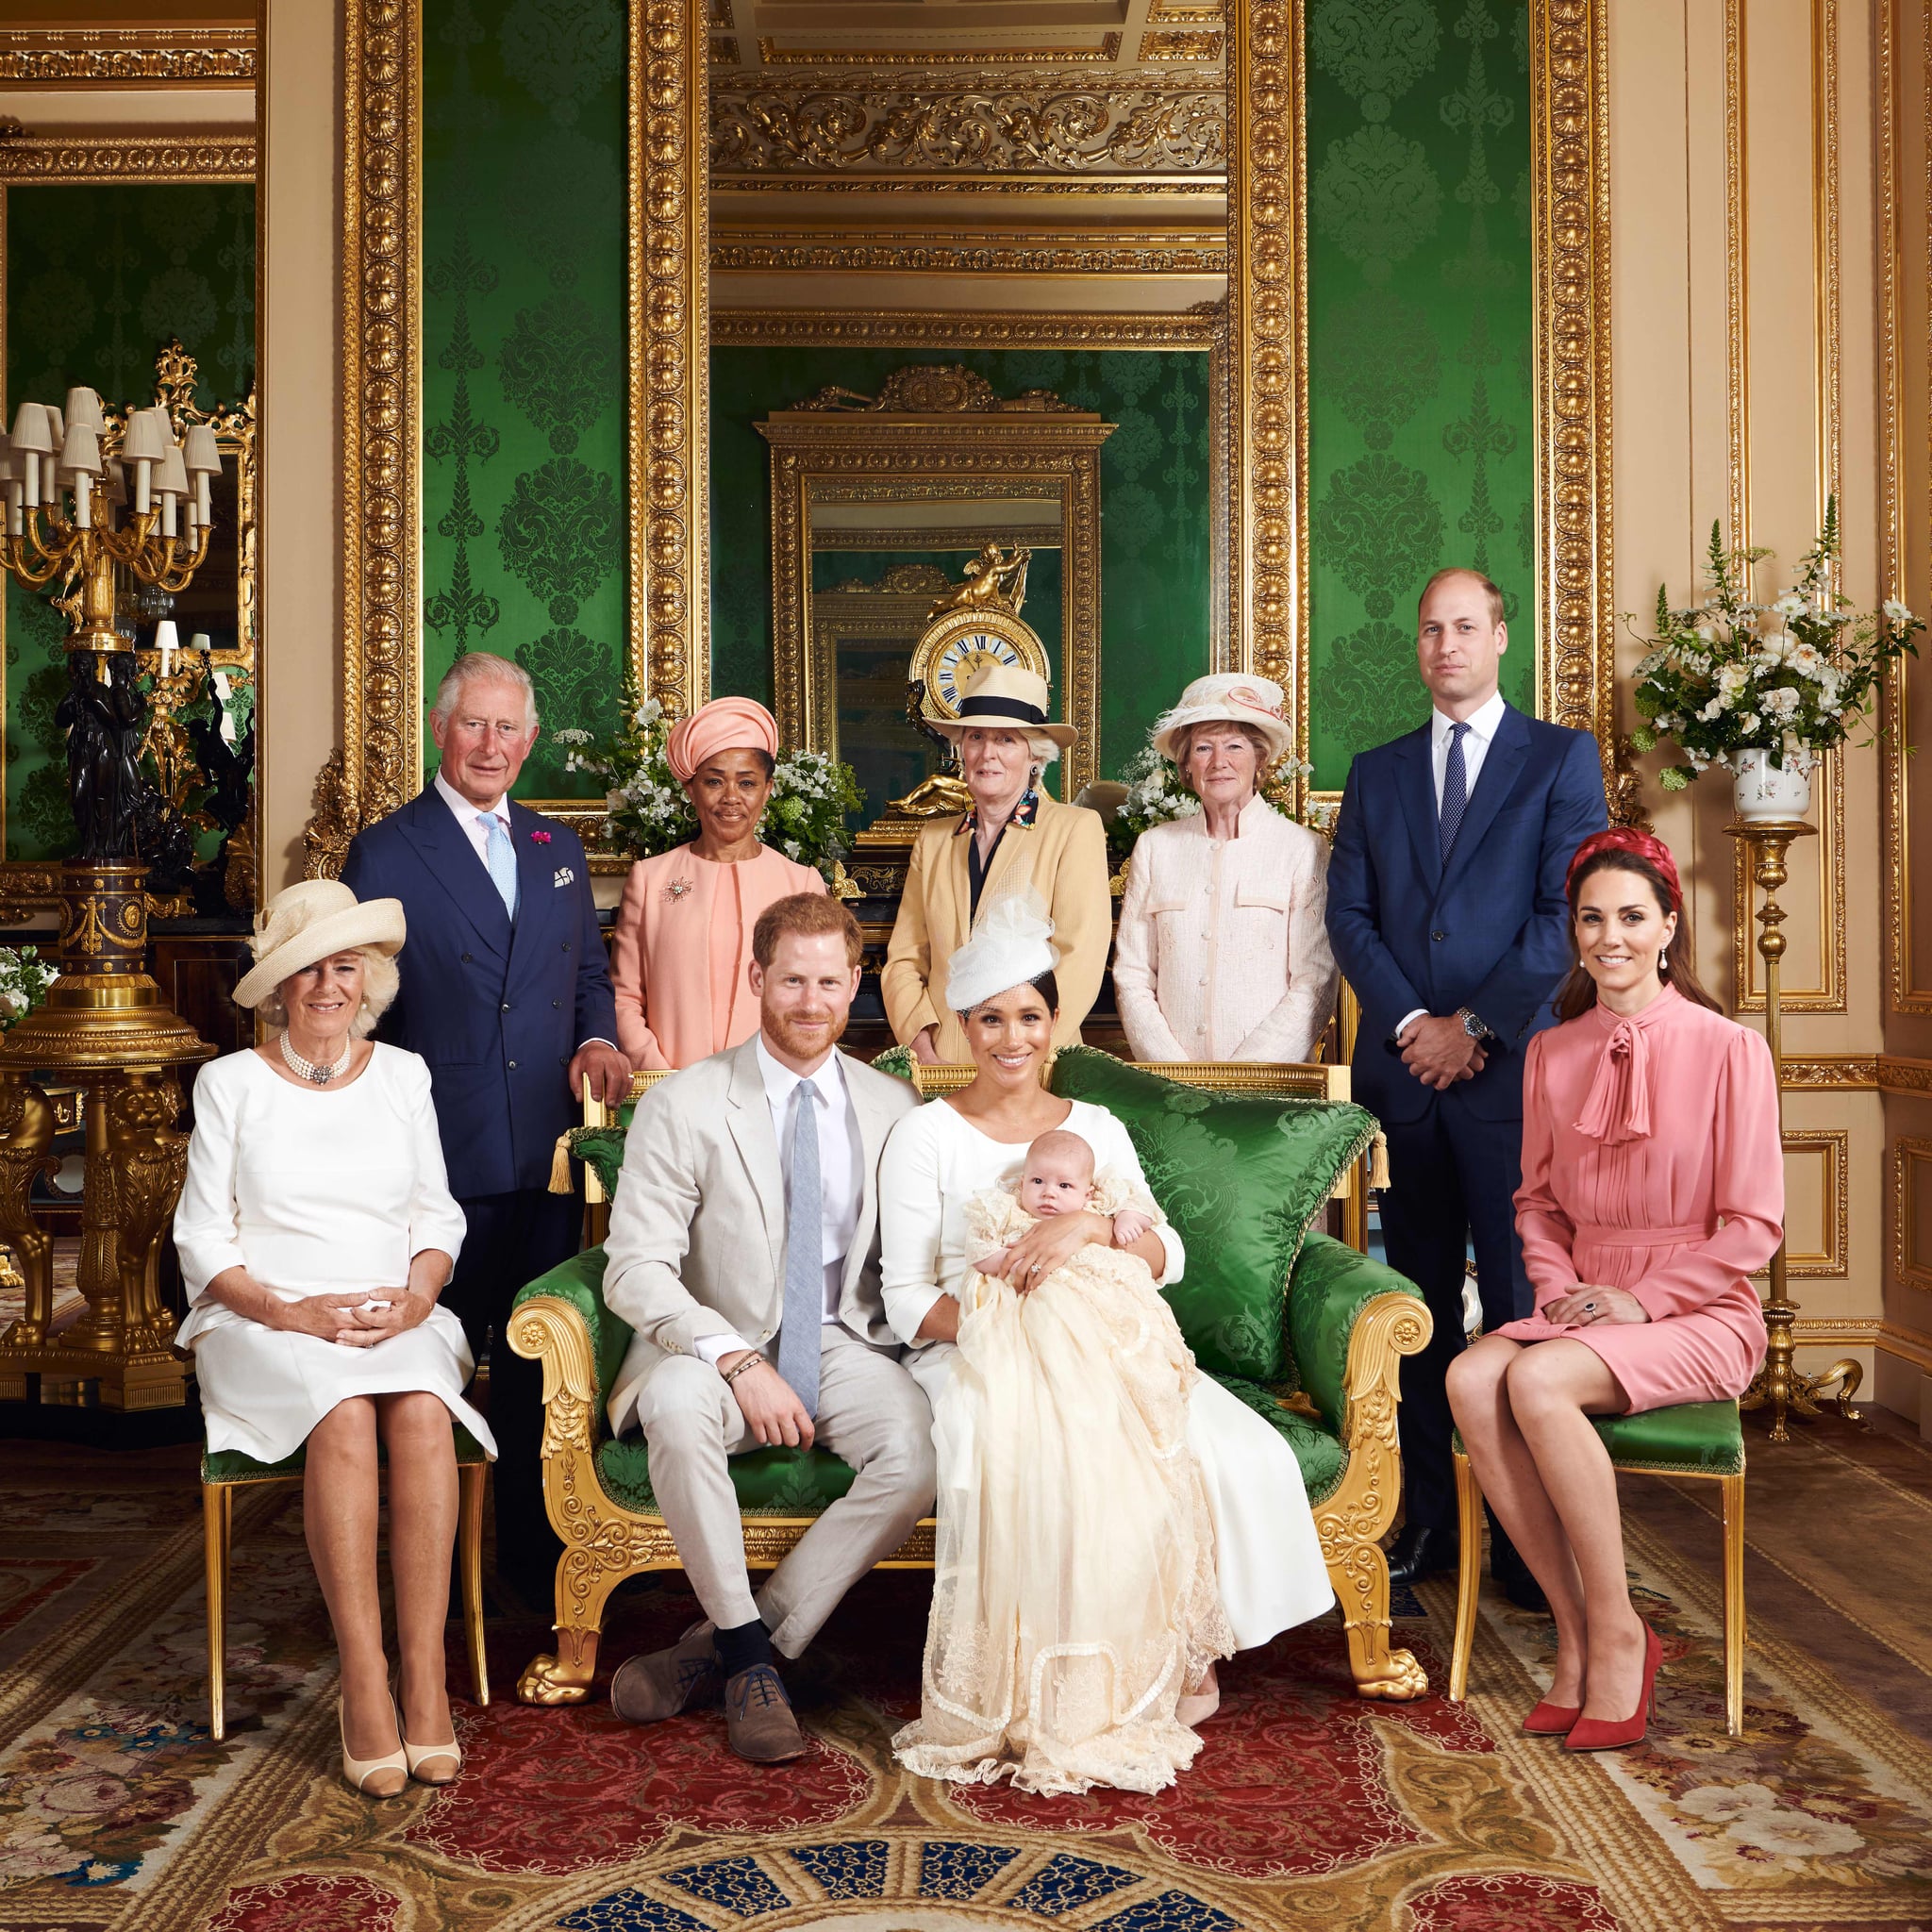 This official handout Christening photograph released by the Duke and Duchess of Sussex shows Britain